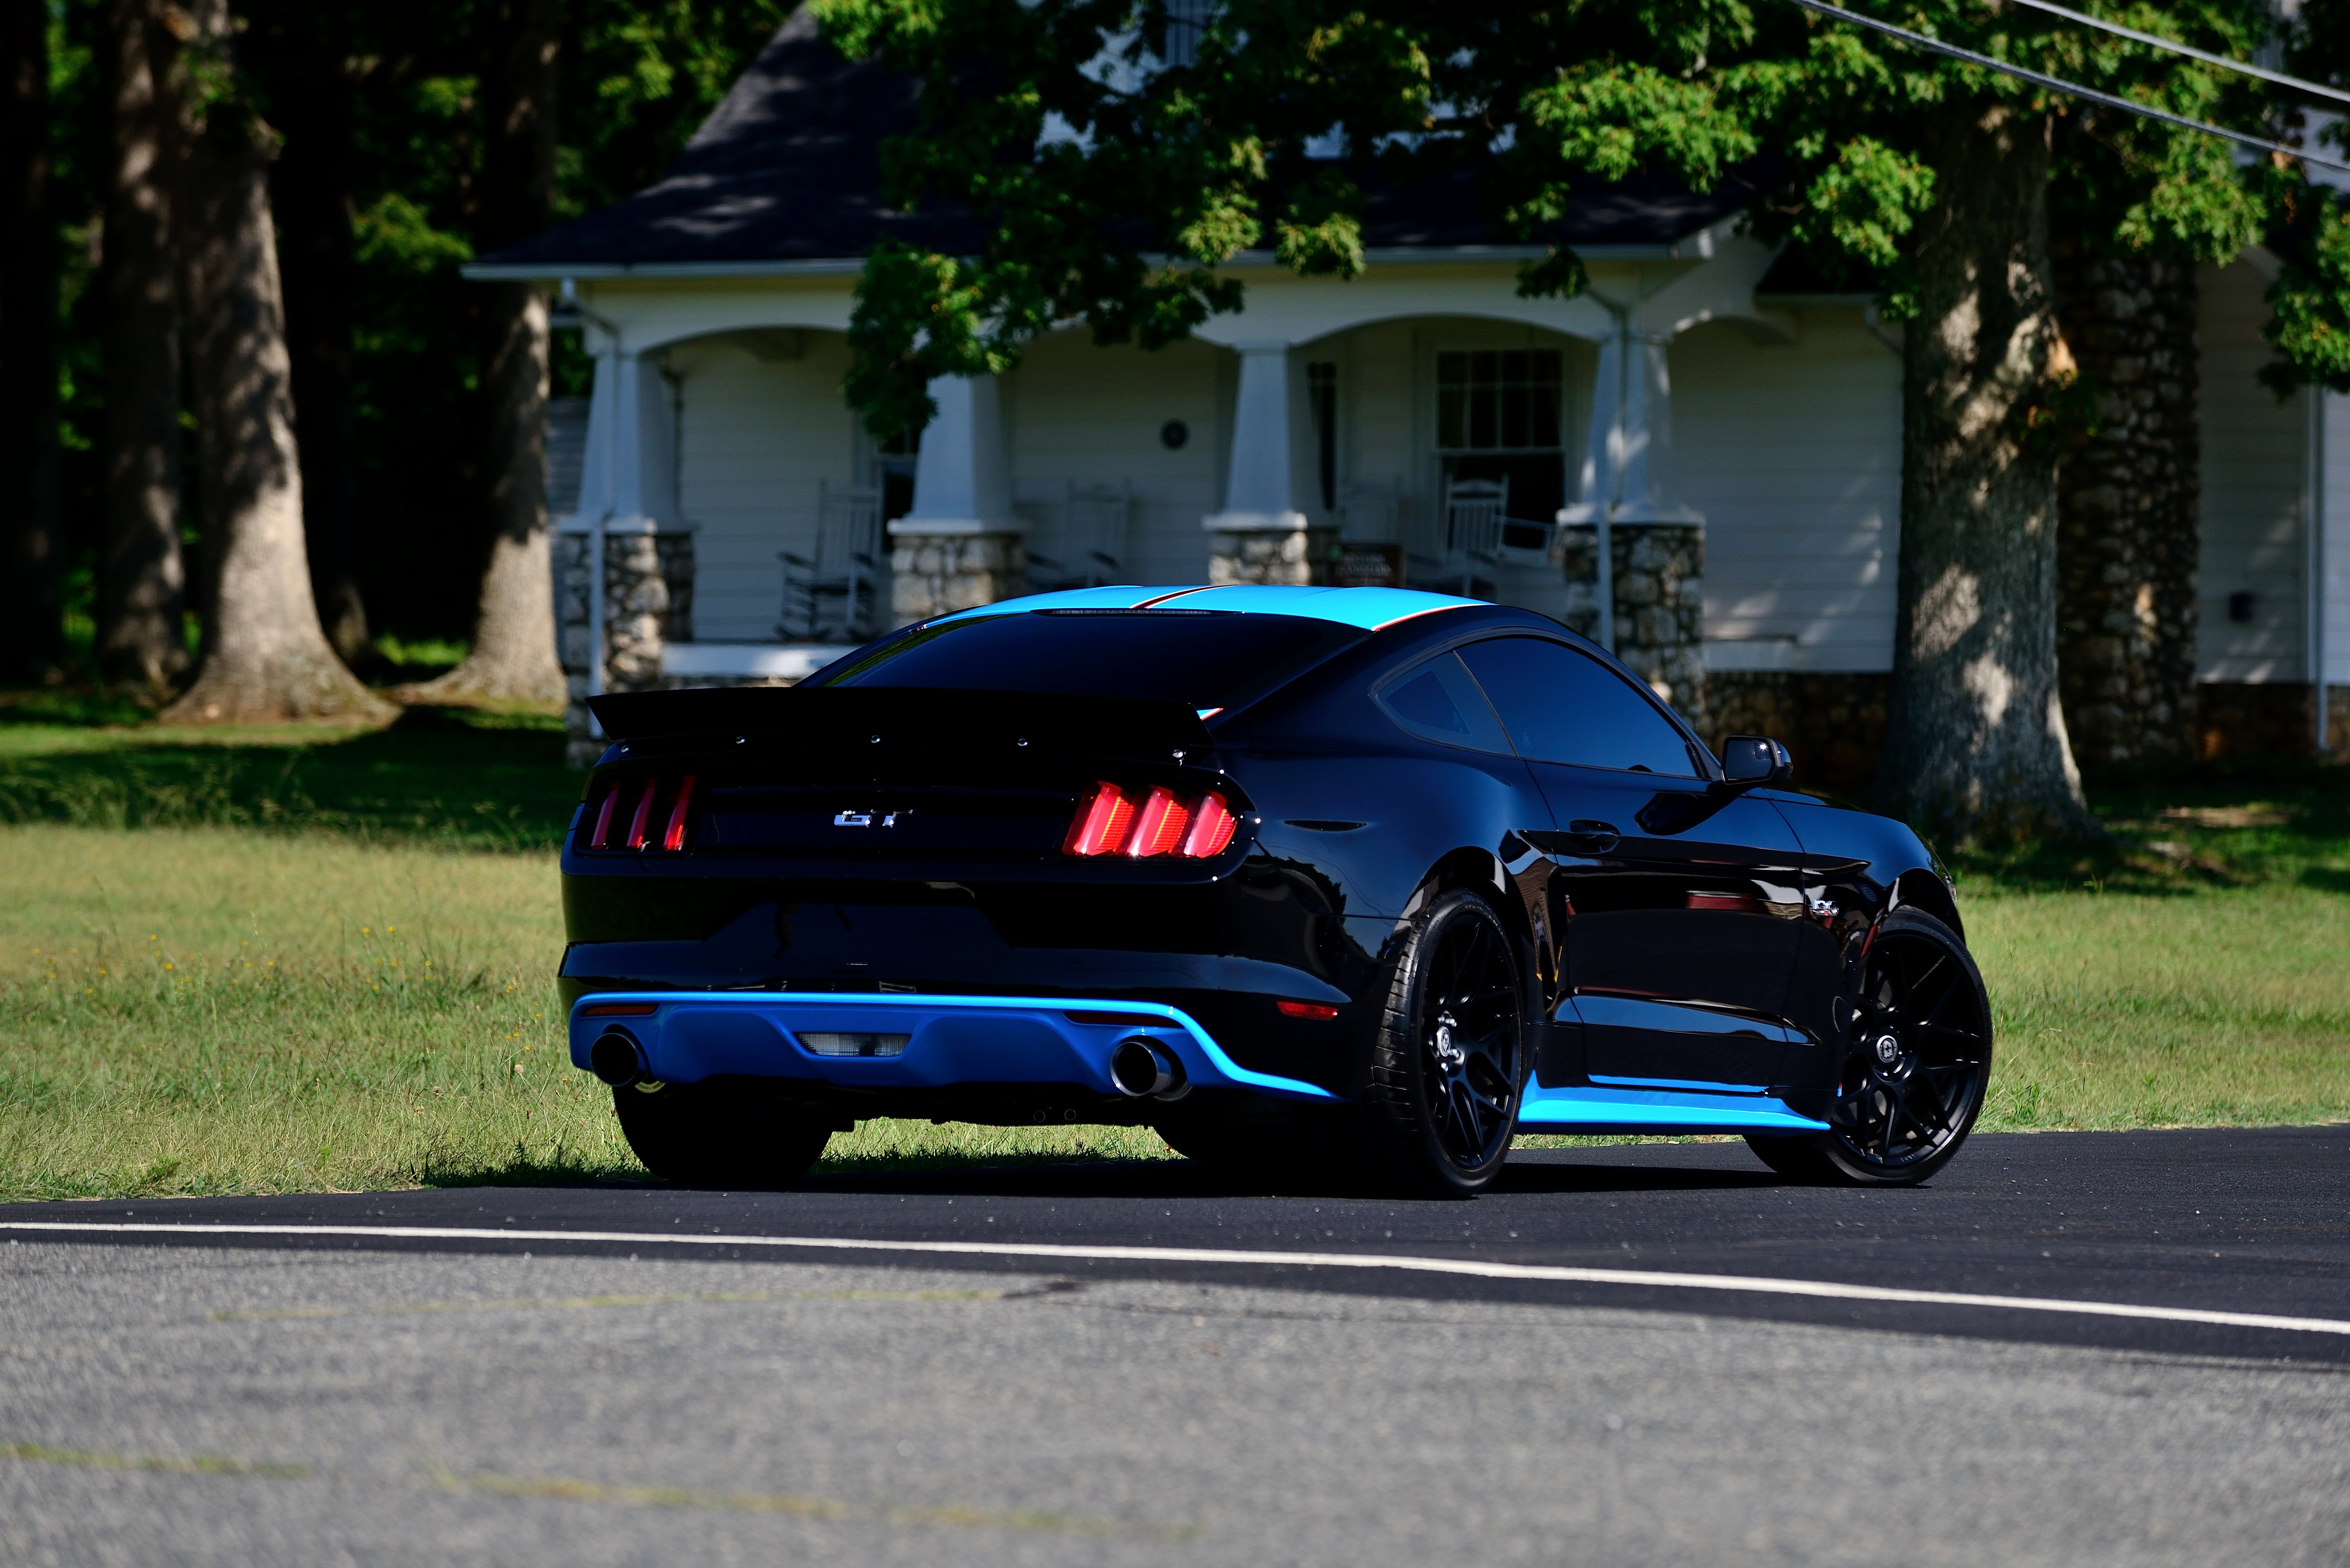 2015, Ford, Mustang, Gt, Pettys, Garage, Muscle, Supercar, Usa,  03 Wallpaper